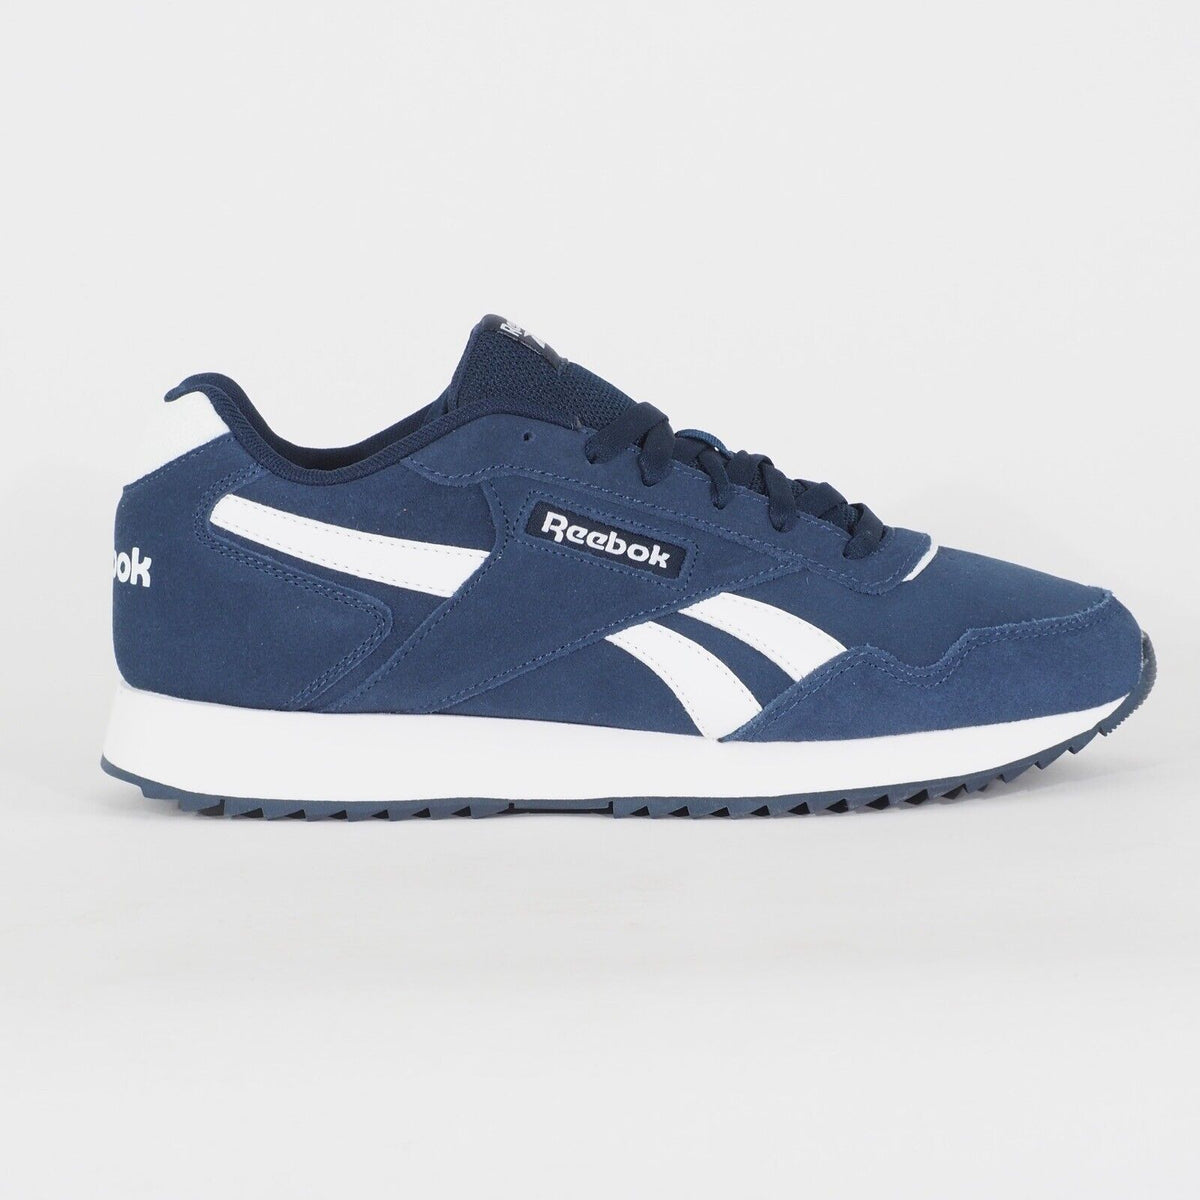 Mens Reebok Glide Ripple GZ5215 Navy Course A Pied Lace Up Suede Navy Trainers